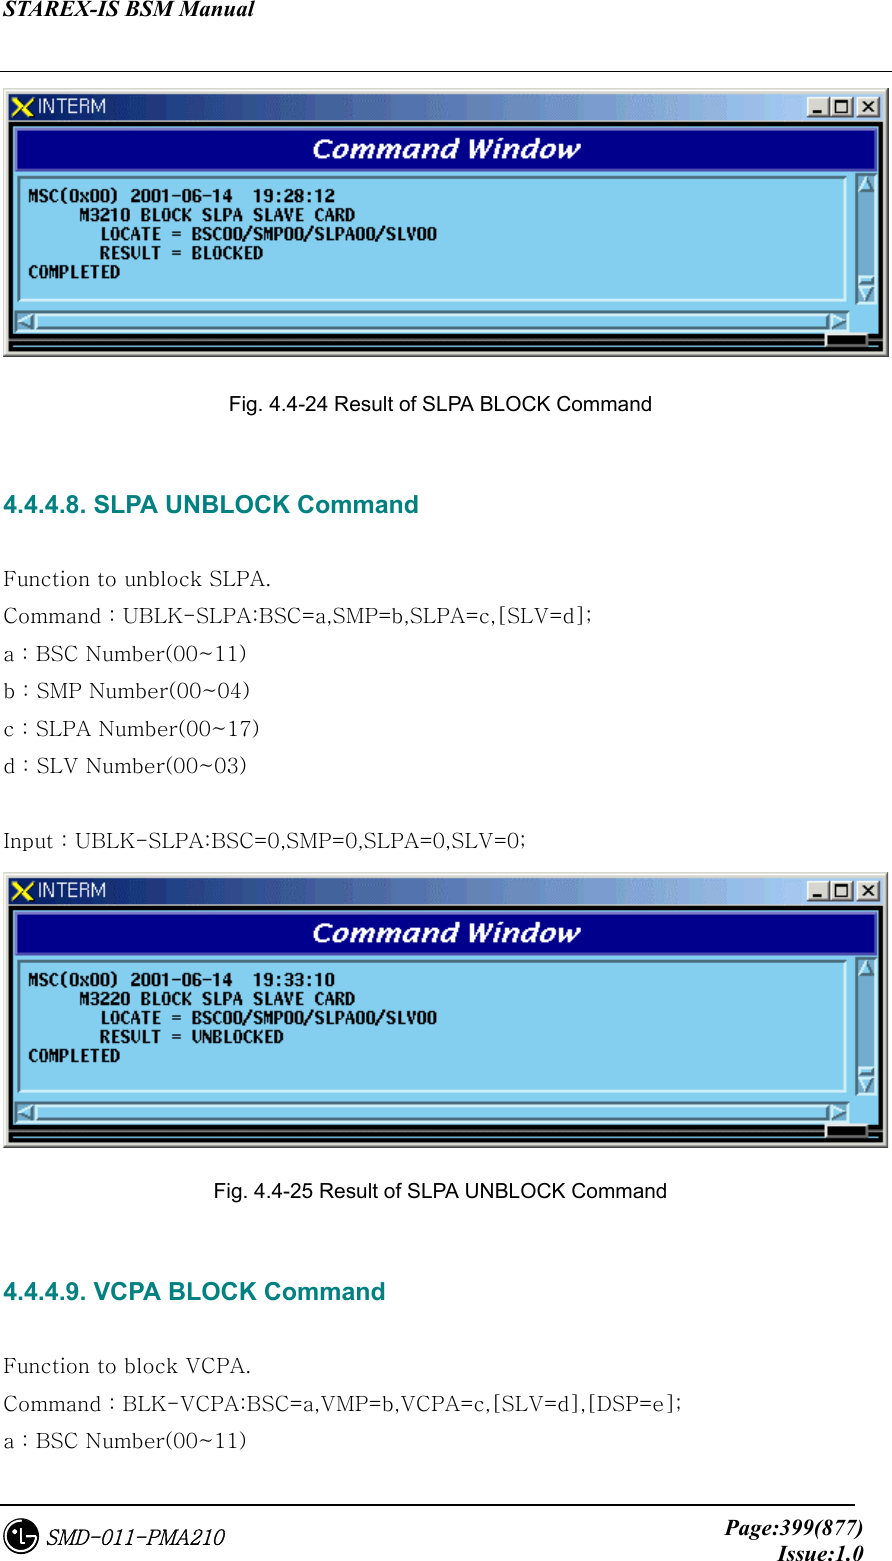 STAREX-IS BSM Manual     Page:399(877)Issue:1.0SMD-011-PMA210  Fig. 4.4-24 Result of SLPA BLOCK Command  4.4.4.8. SLPA UNBLOCK Command  Function to unblock SLPA. Command : UBLK-SLPA:BSC=a,SMP=b,SLPA=c,[SLV=d]; a : BSC Number(00~11) b : SMP Number(00~04) c : SLPA Number(00~17) d : SLV Number(00~03)  Input : UBLK-SLPA:BSC=0,SMP=0,SLPA=0,SLV=0;  Fig. 4.4-25 Result of SLPA UNBLOCK Command  4.4.4.9. VCPA BLOCK Command  Function to block VCPA. Command : BLK-VCPA:BSC=a,VMP=b,VCPA=c,[SLV=d],[DSP=e]; a : BSC Number(00~11) 